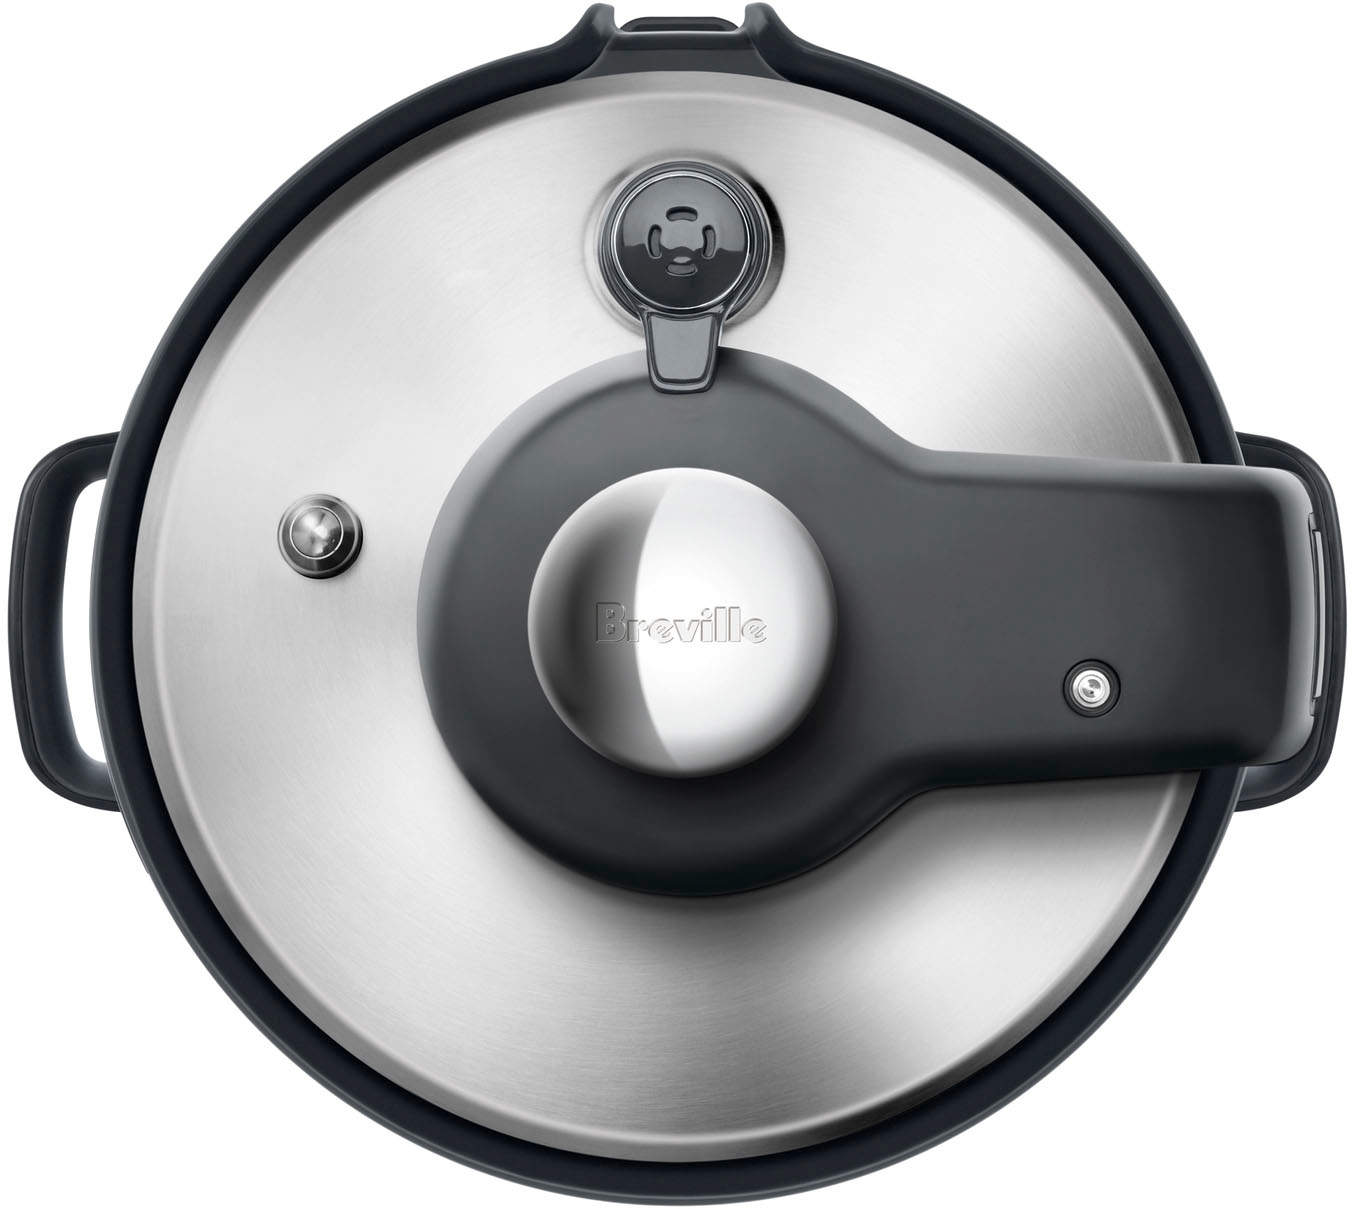 The Breville Fast Slow Go Pressure Cooker: The Best Gift for Foodies